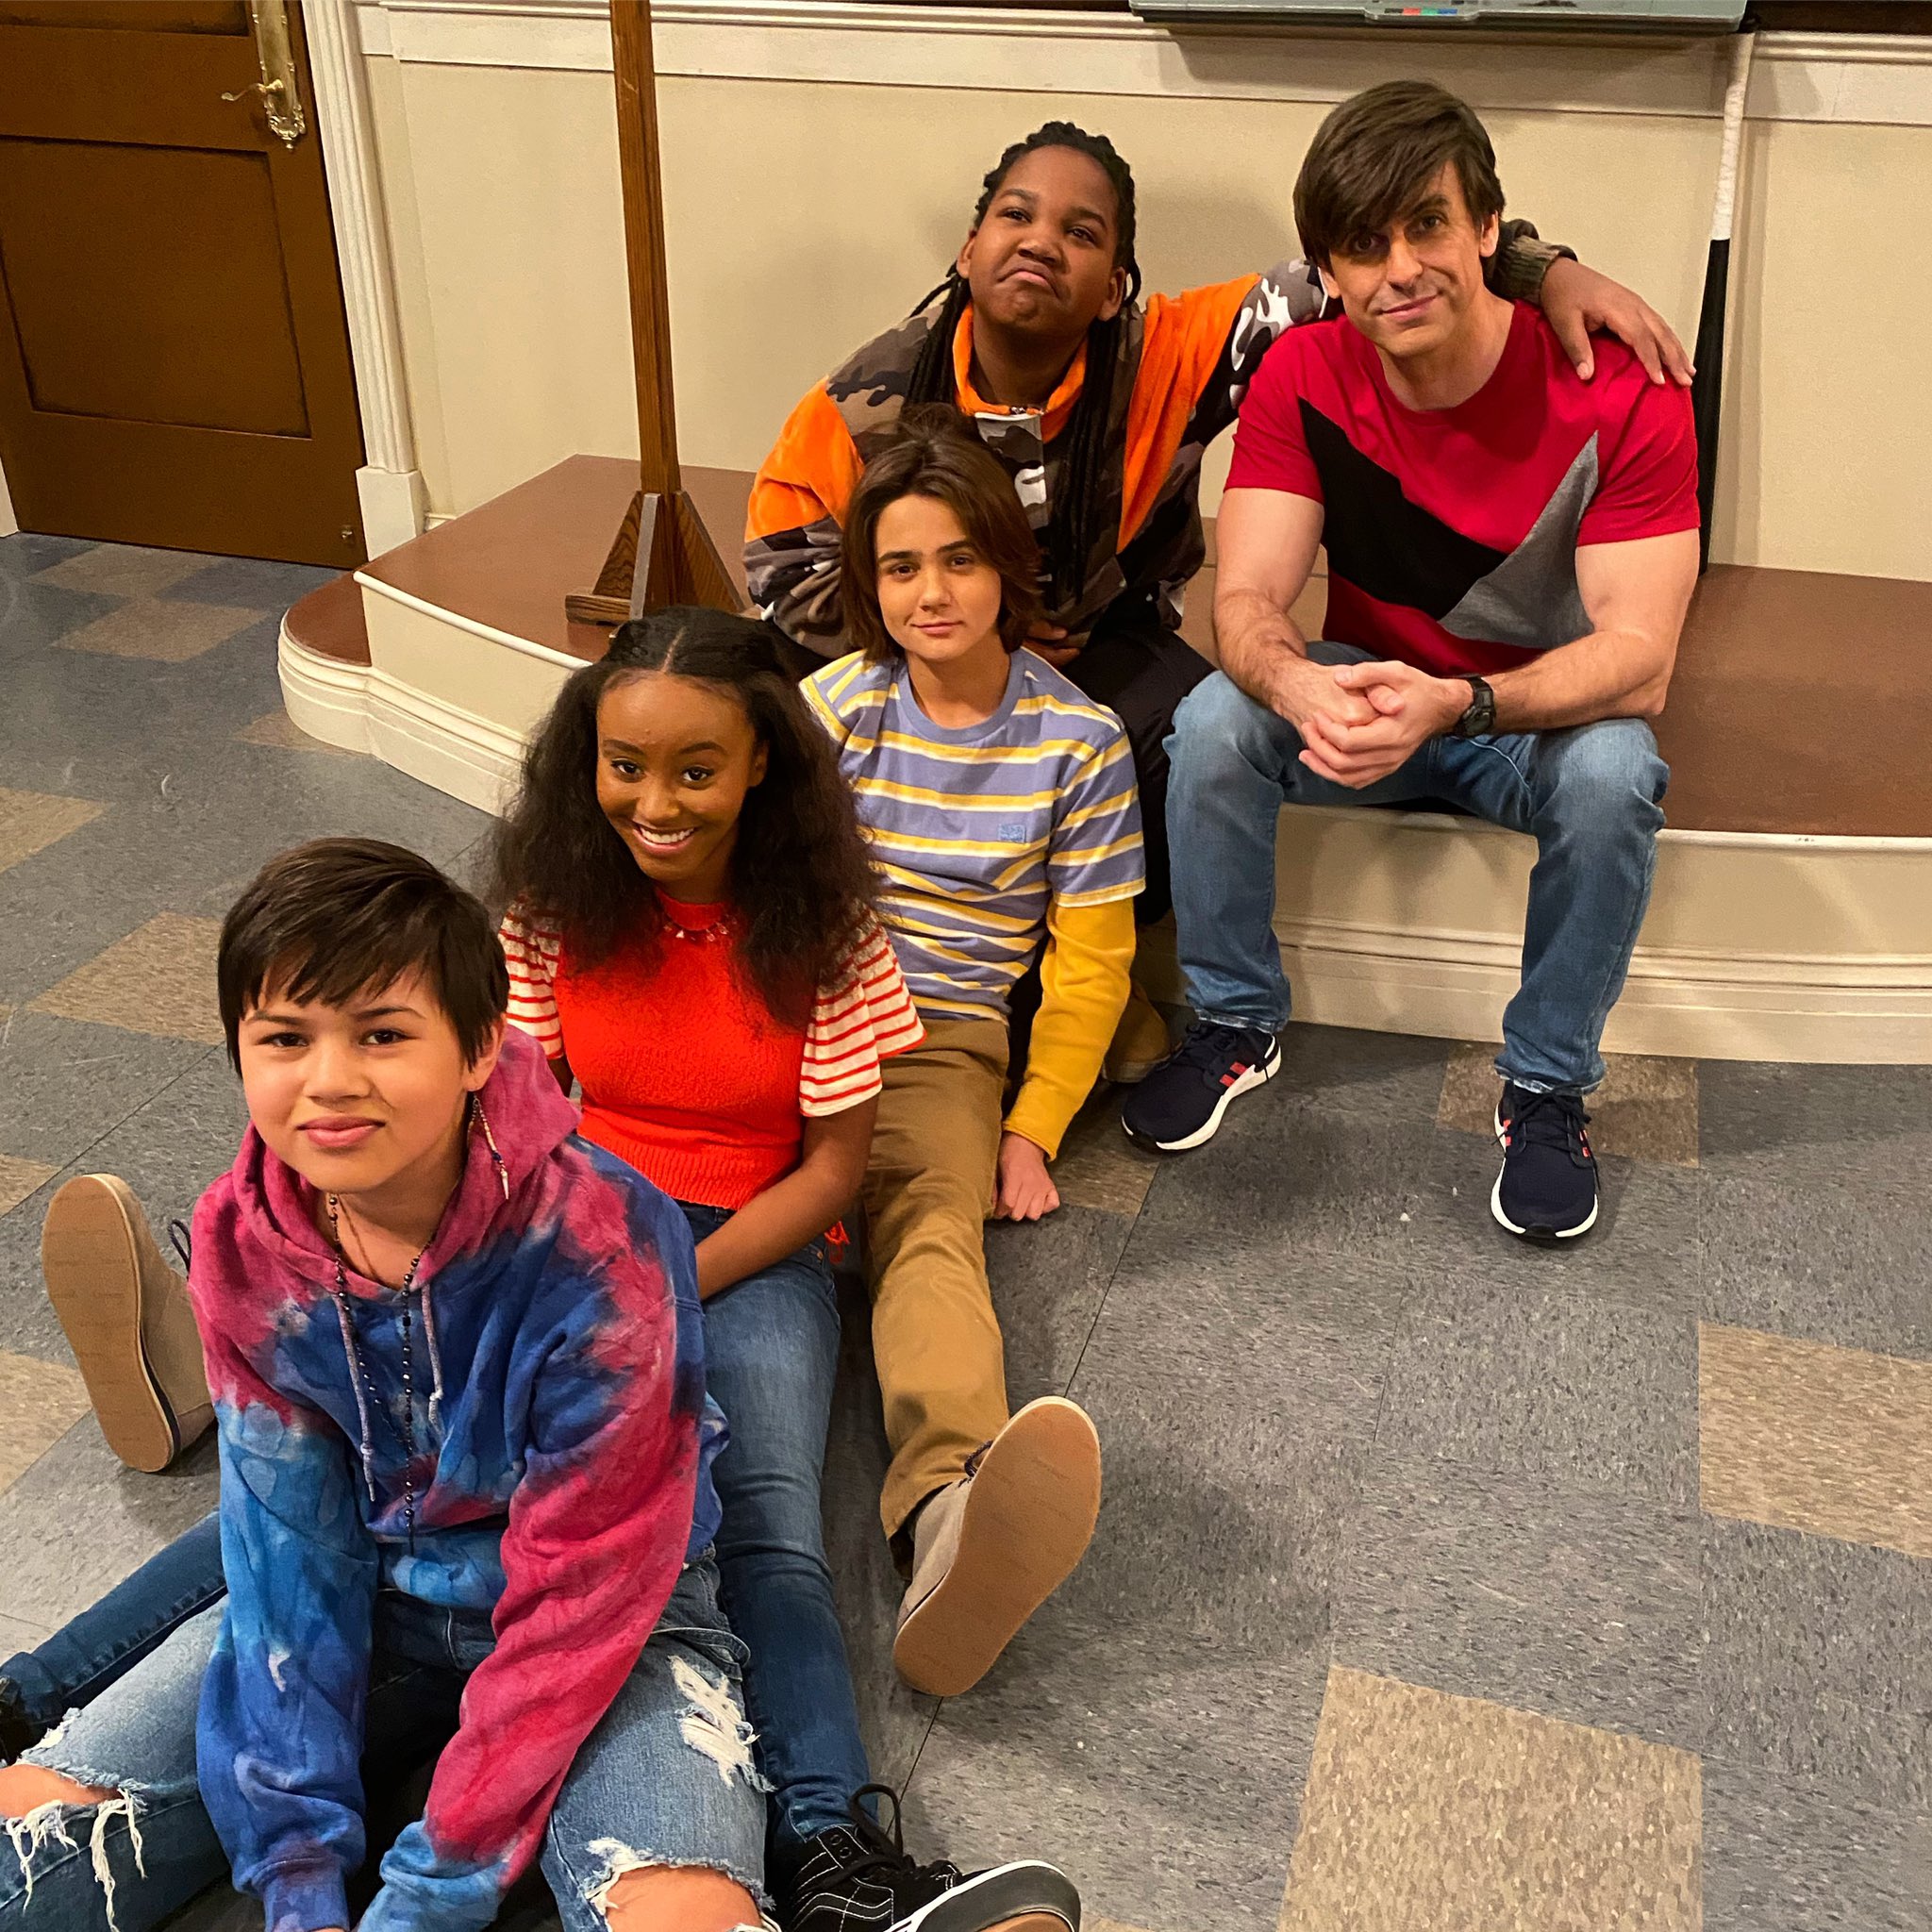 Mike Caron on X: NEW EPISODE of #DANGERFORCE this weekend!!!! 🎉🎊🎈🥳🥳  Get that popcorn ready!!! 😎 @Nickelodeon @HenryDanger #Nickelodeon  #HenryDanger  / X